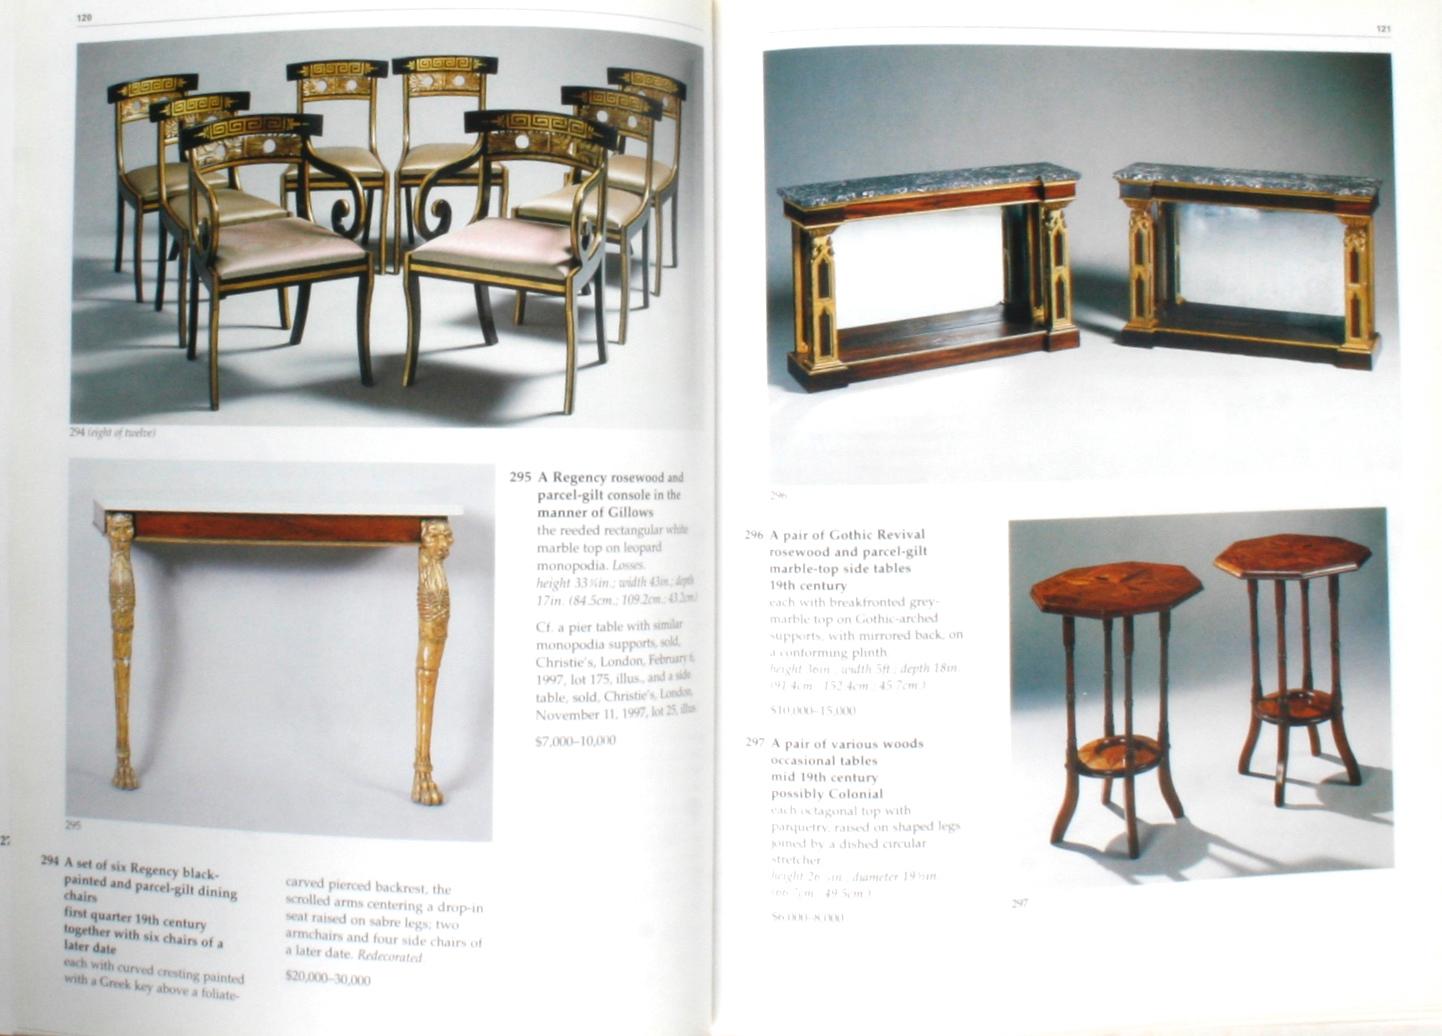 Sotheby's; Important English Furniture, European Ceramics and Decorations For Sale 3